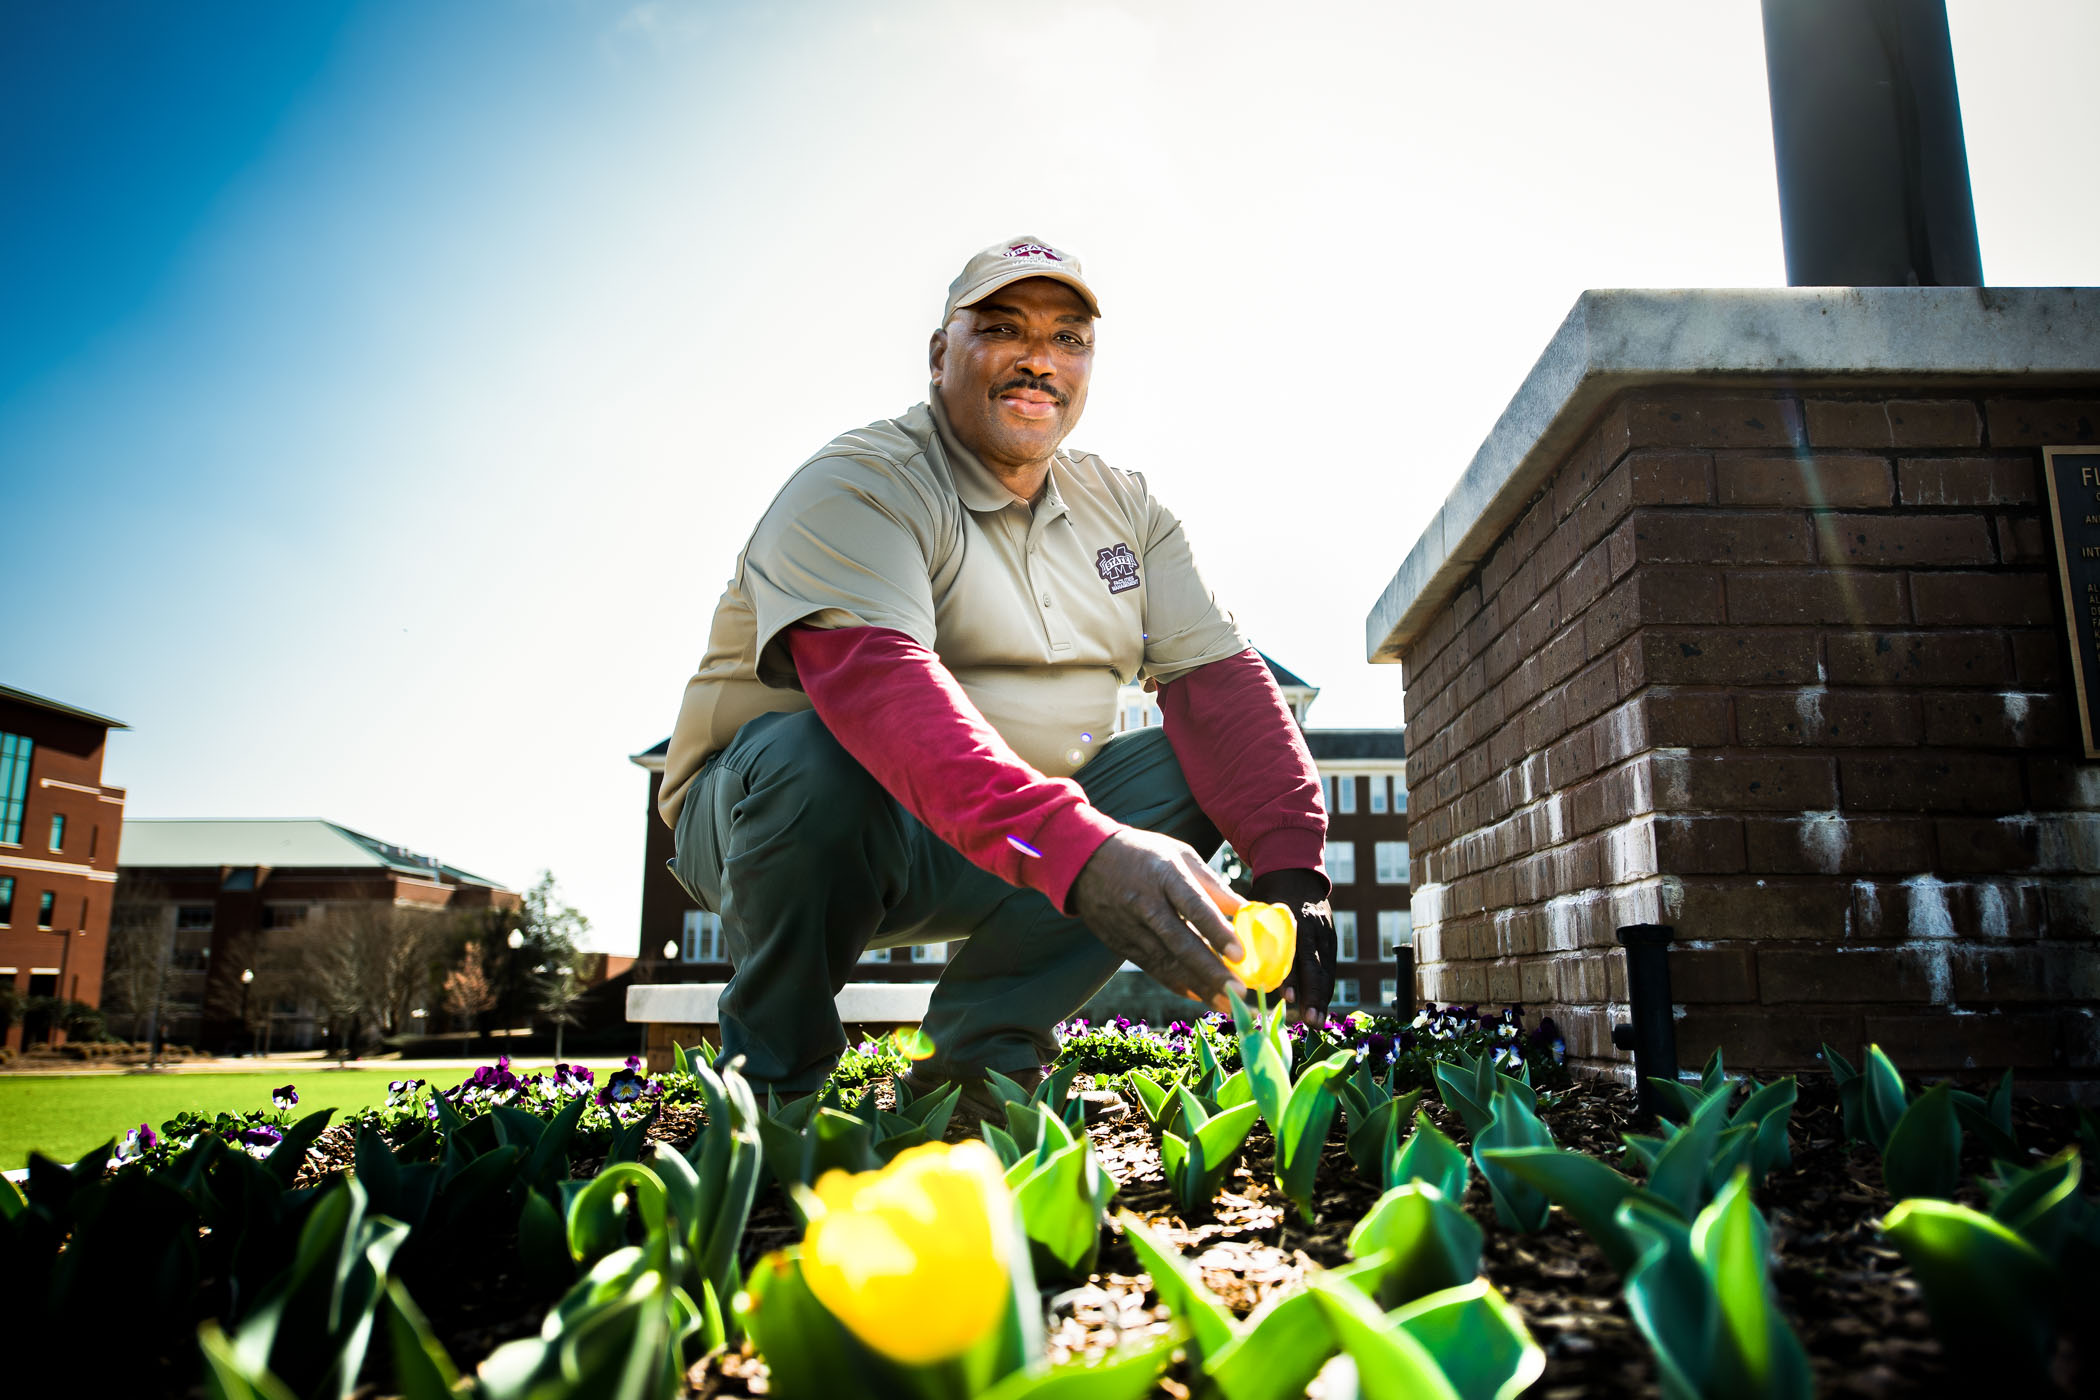 Gussie Lane, pictured tending a flower bed on the MSU Drill Field